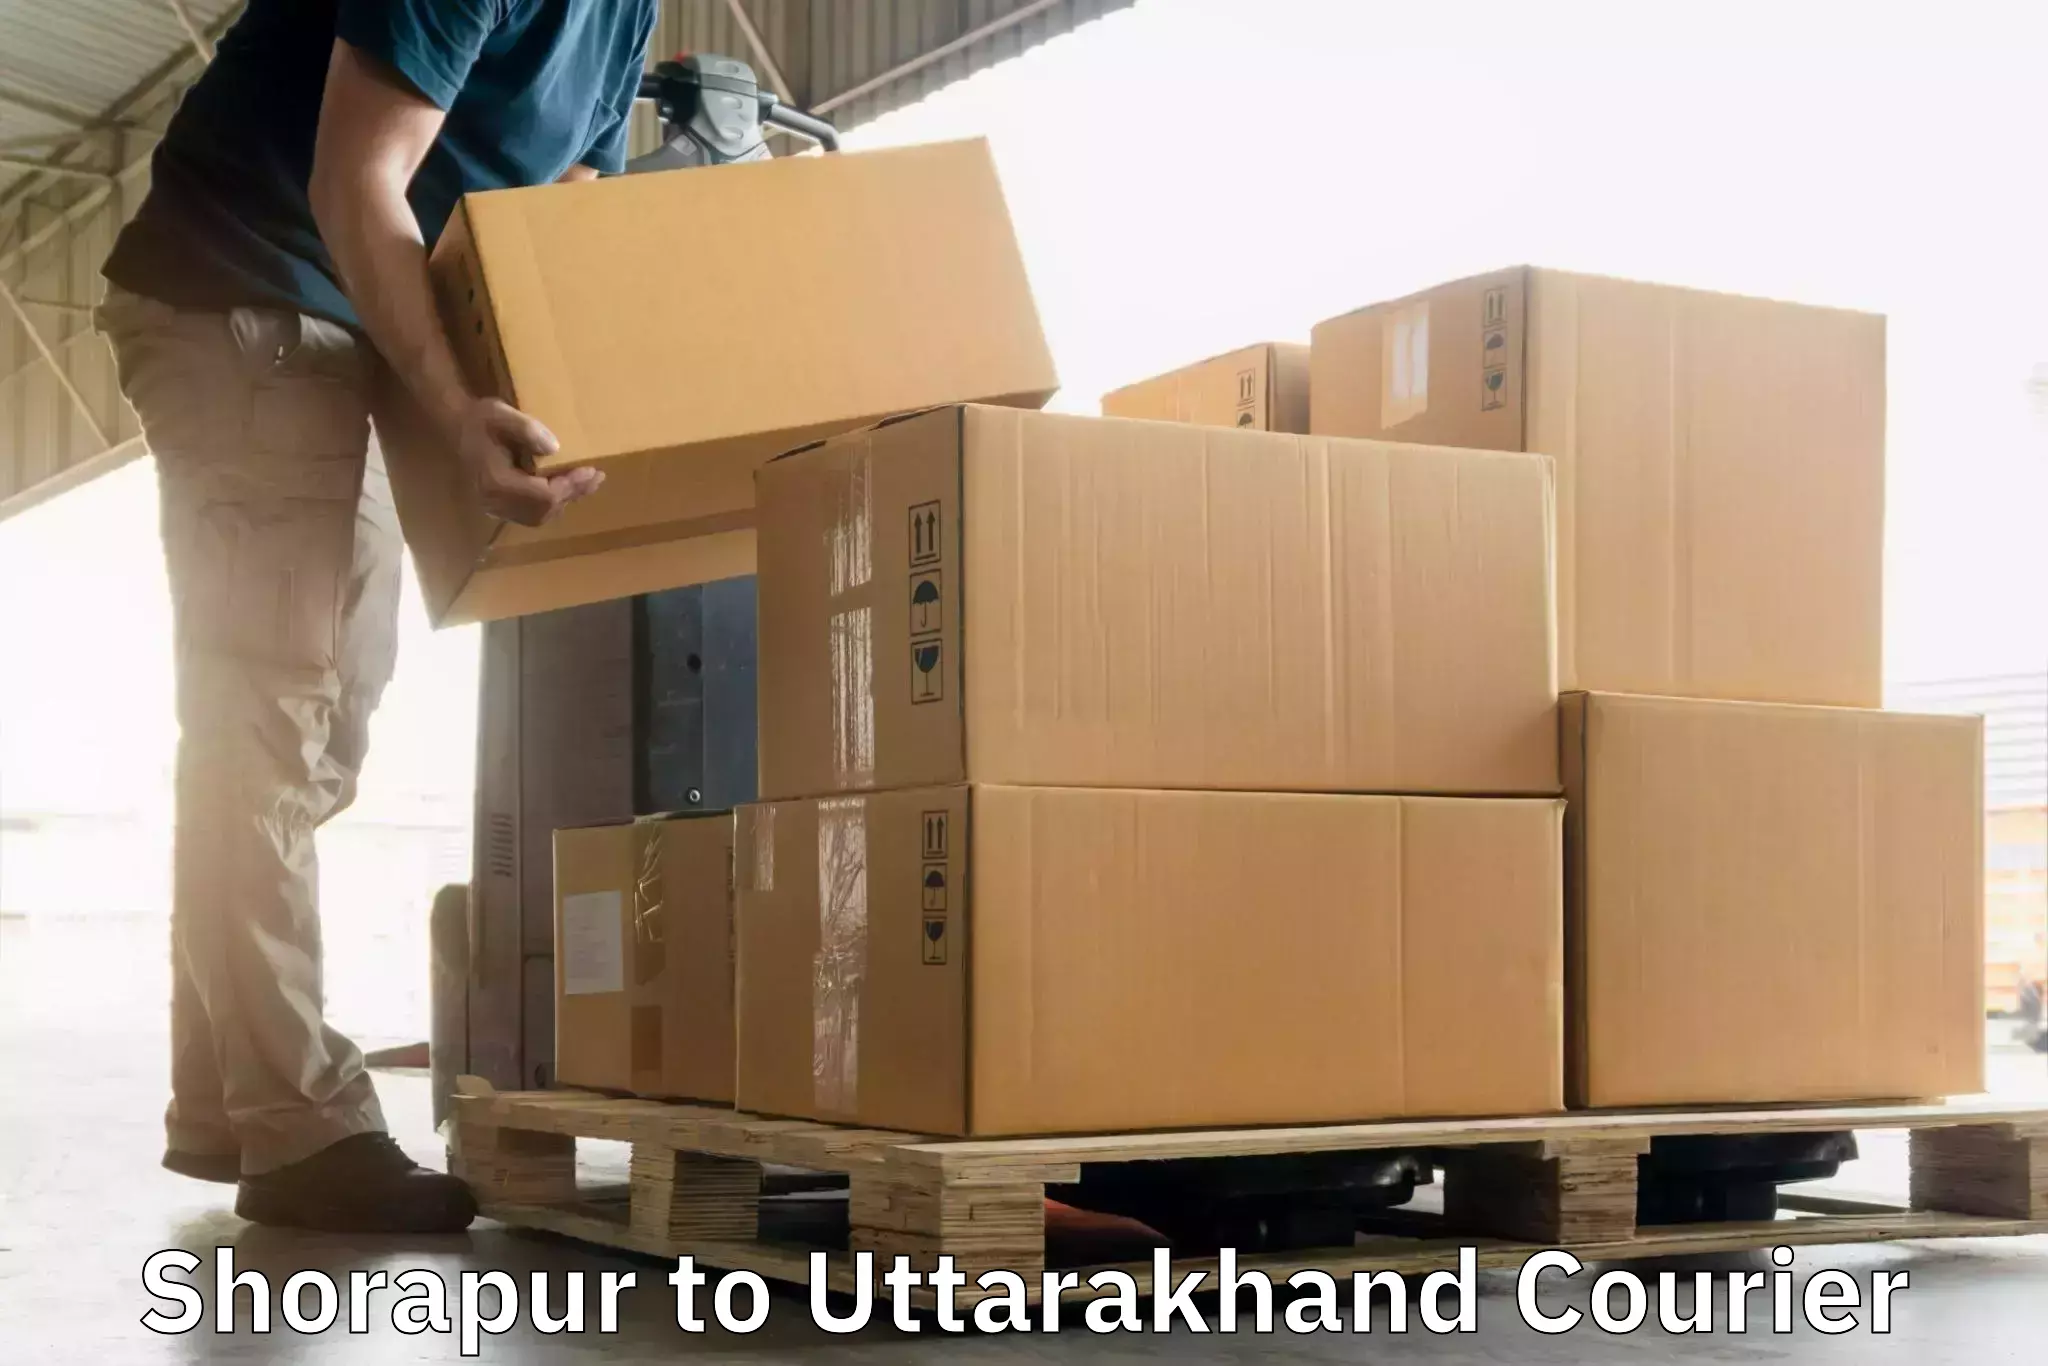 State-of-the-art courier technology Shorapur to Lansdowne